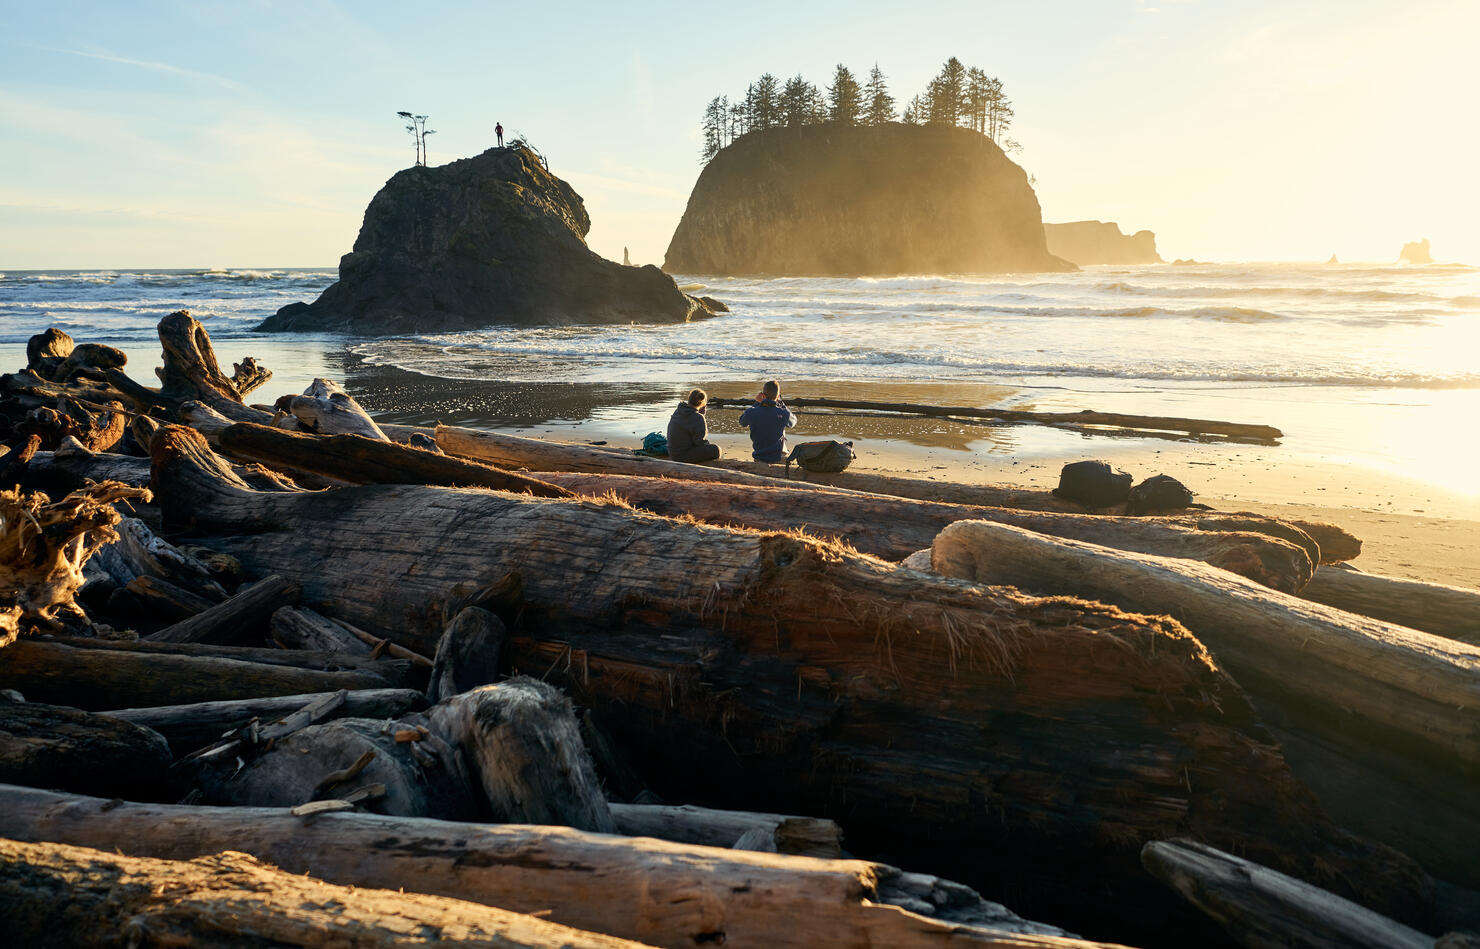 Couple sitting on logs at beach during sunset in Washington